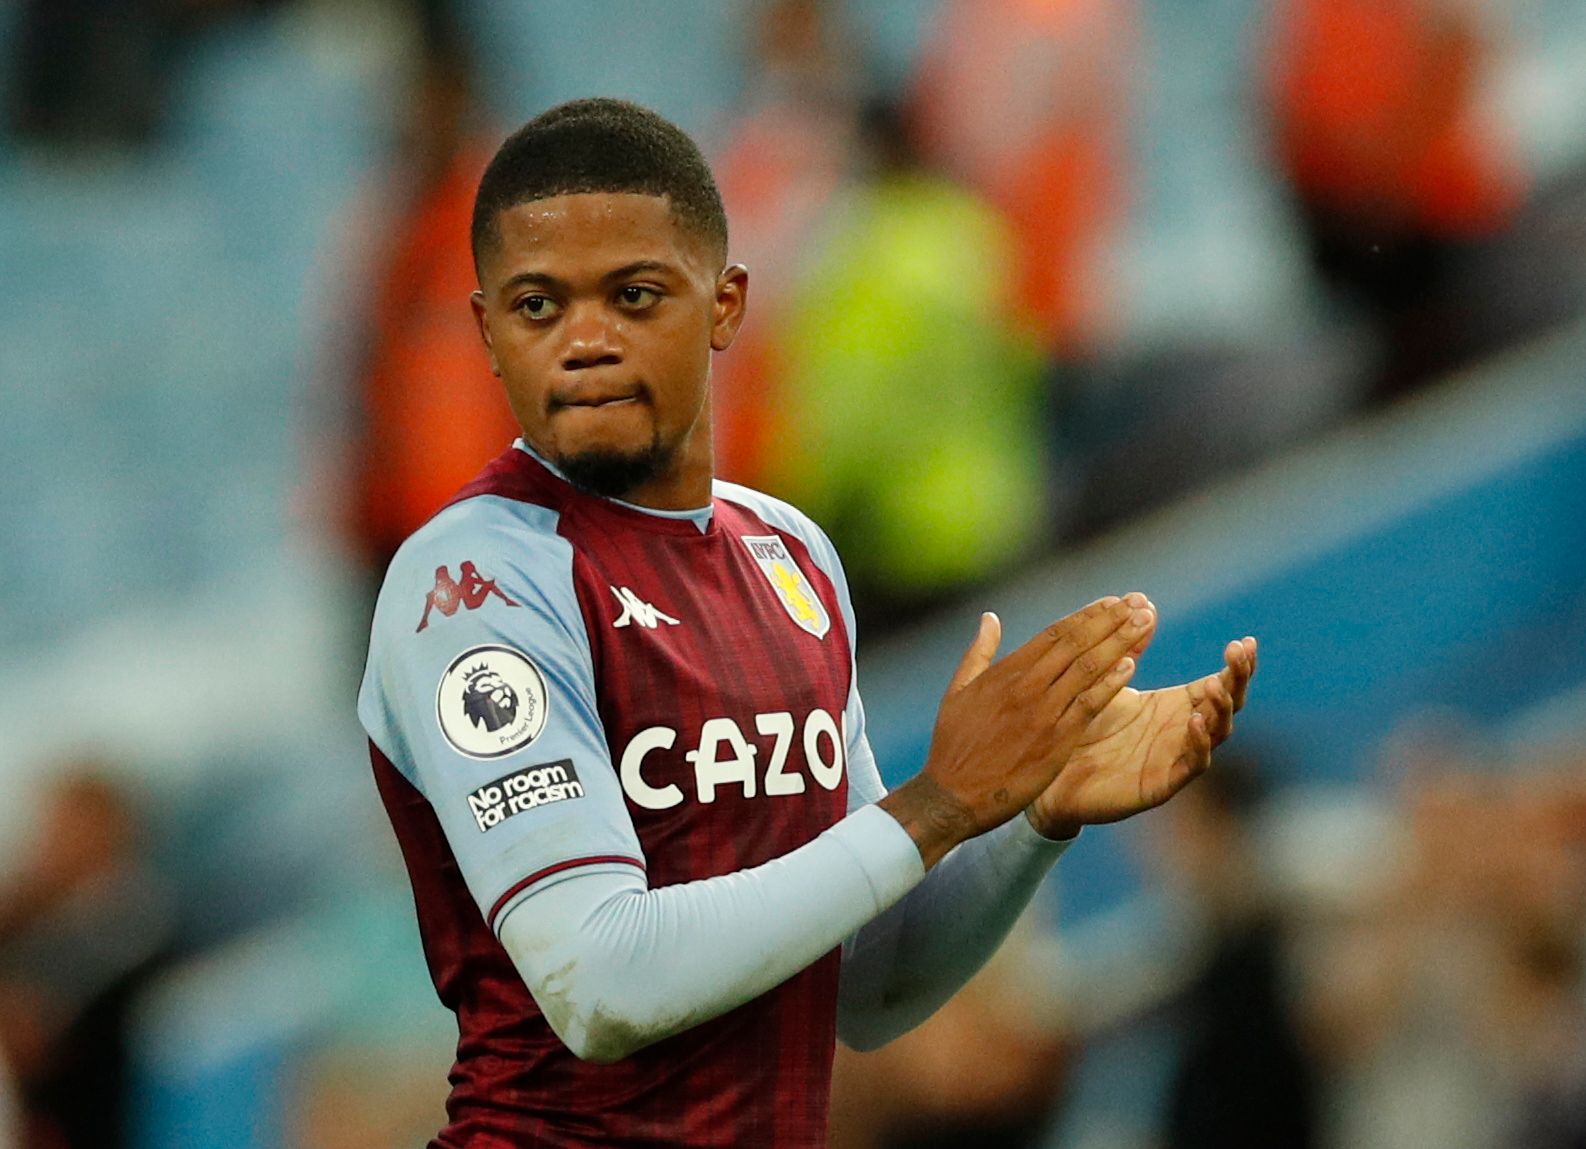 Soccer Football - Premier League - Aston Villa v Everton - Villa Park, Birmingham, Britain - September 18, 2021 Aston Villa's Leon Bailey applauds fans after the match Action Images via Reuters/Andrew Boyers EDITORIAL USE ONLY. No use with unauthorized audio, video, data, fixture lists, club/league logos or 'live' services. Online in-match use limited to 75 images, no video emulation. No use in betting, games or single club /league/player publications.  Please contact your account representative